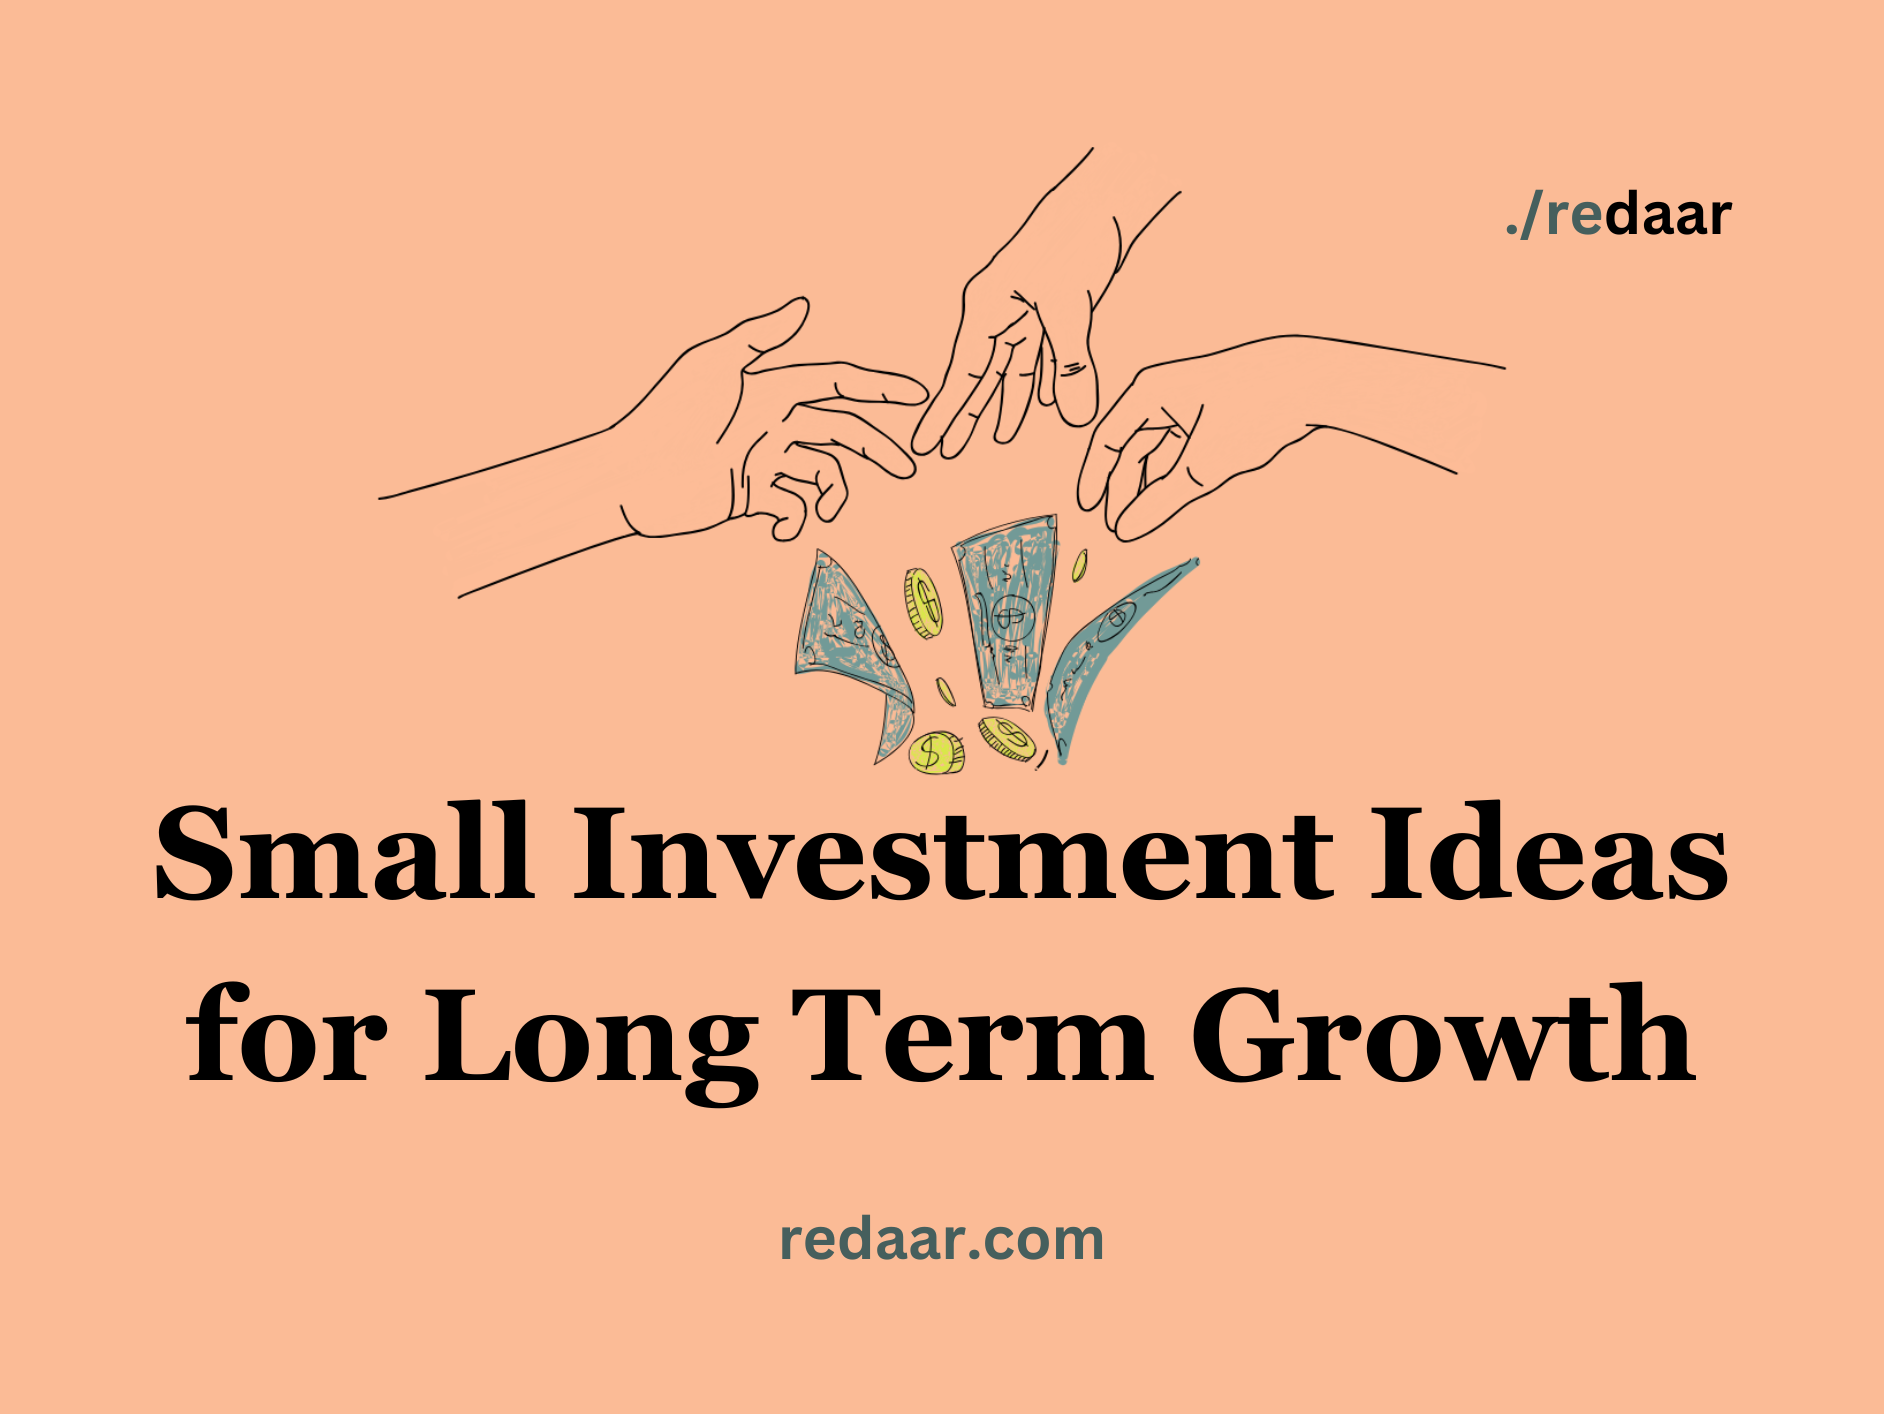 Small Investment Ideas for Long Term Growth